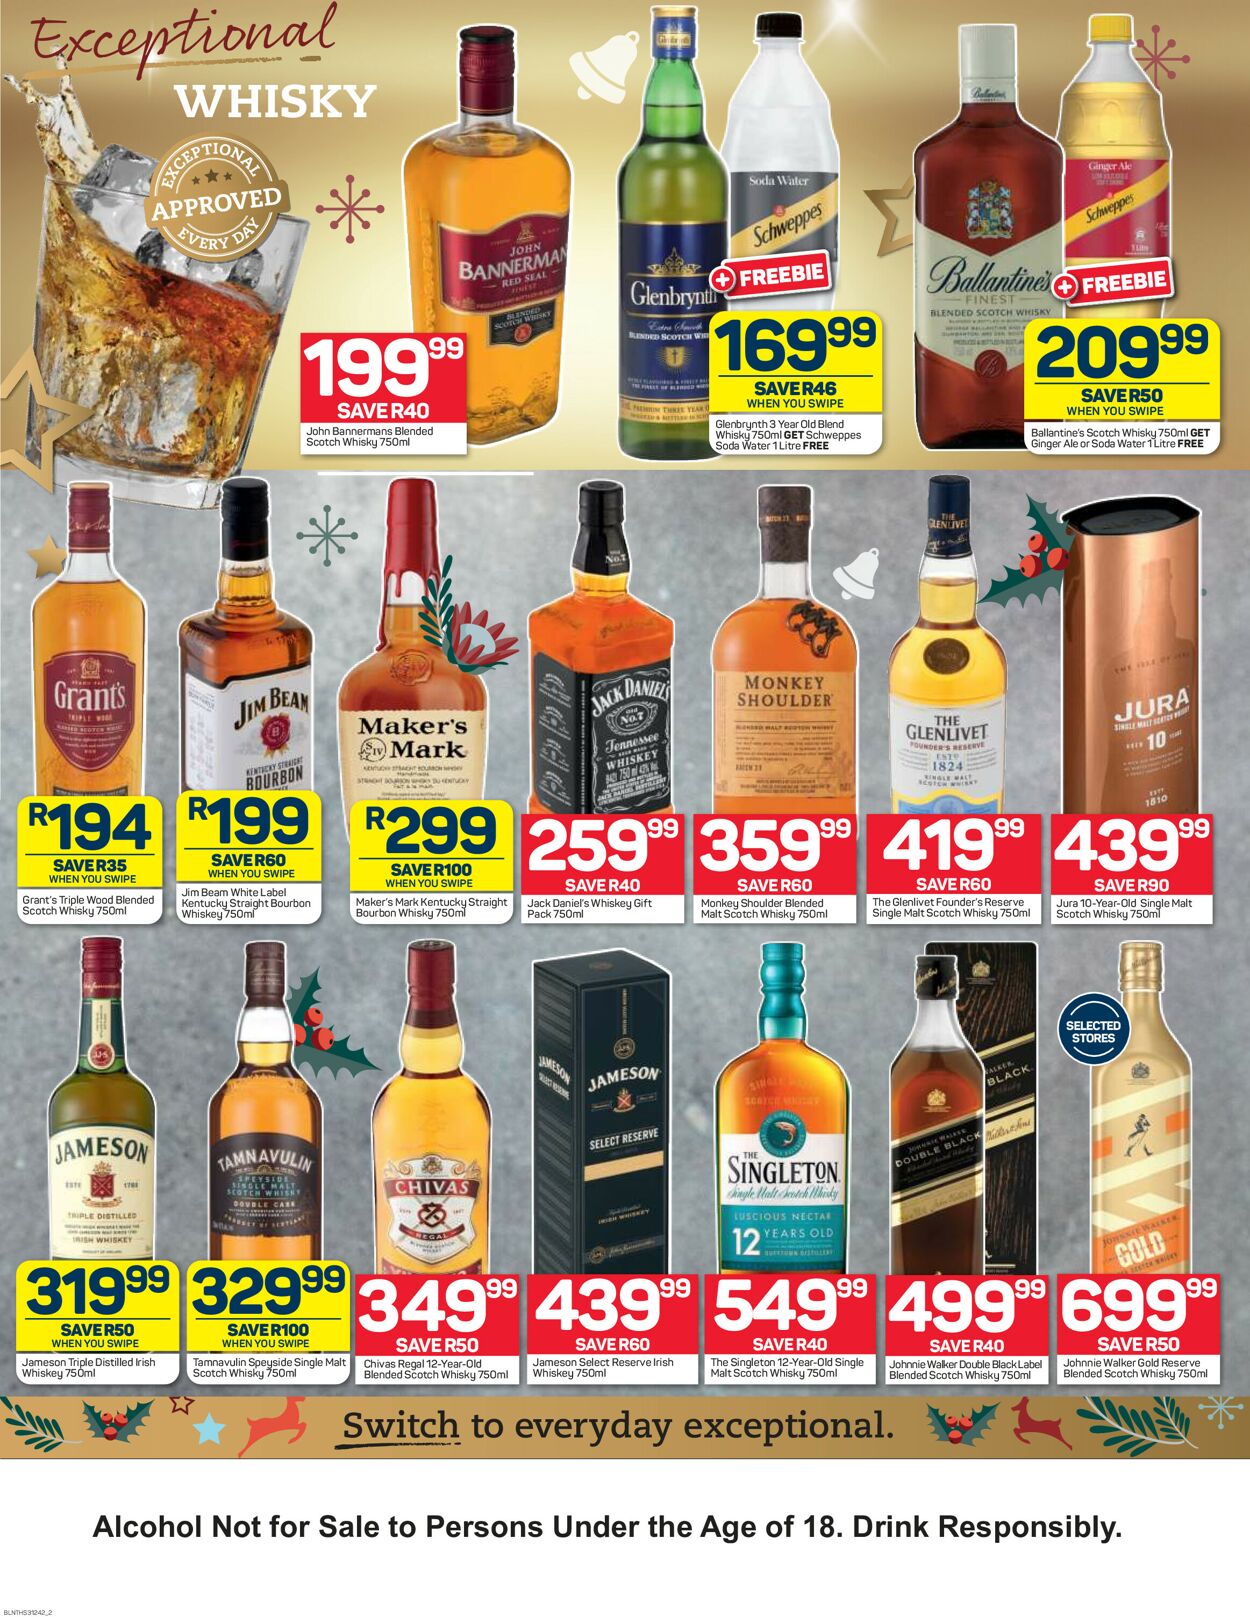 Pick n Pay Catalogue - 2022/10/24-2022/11/06 (Page 2)